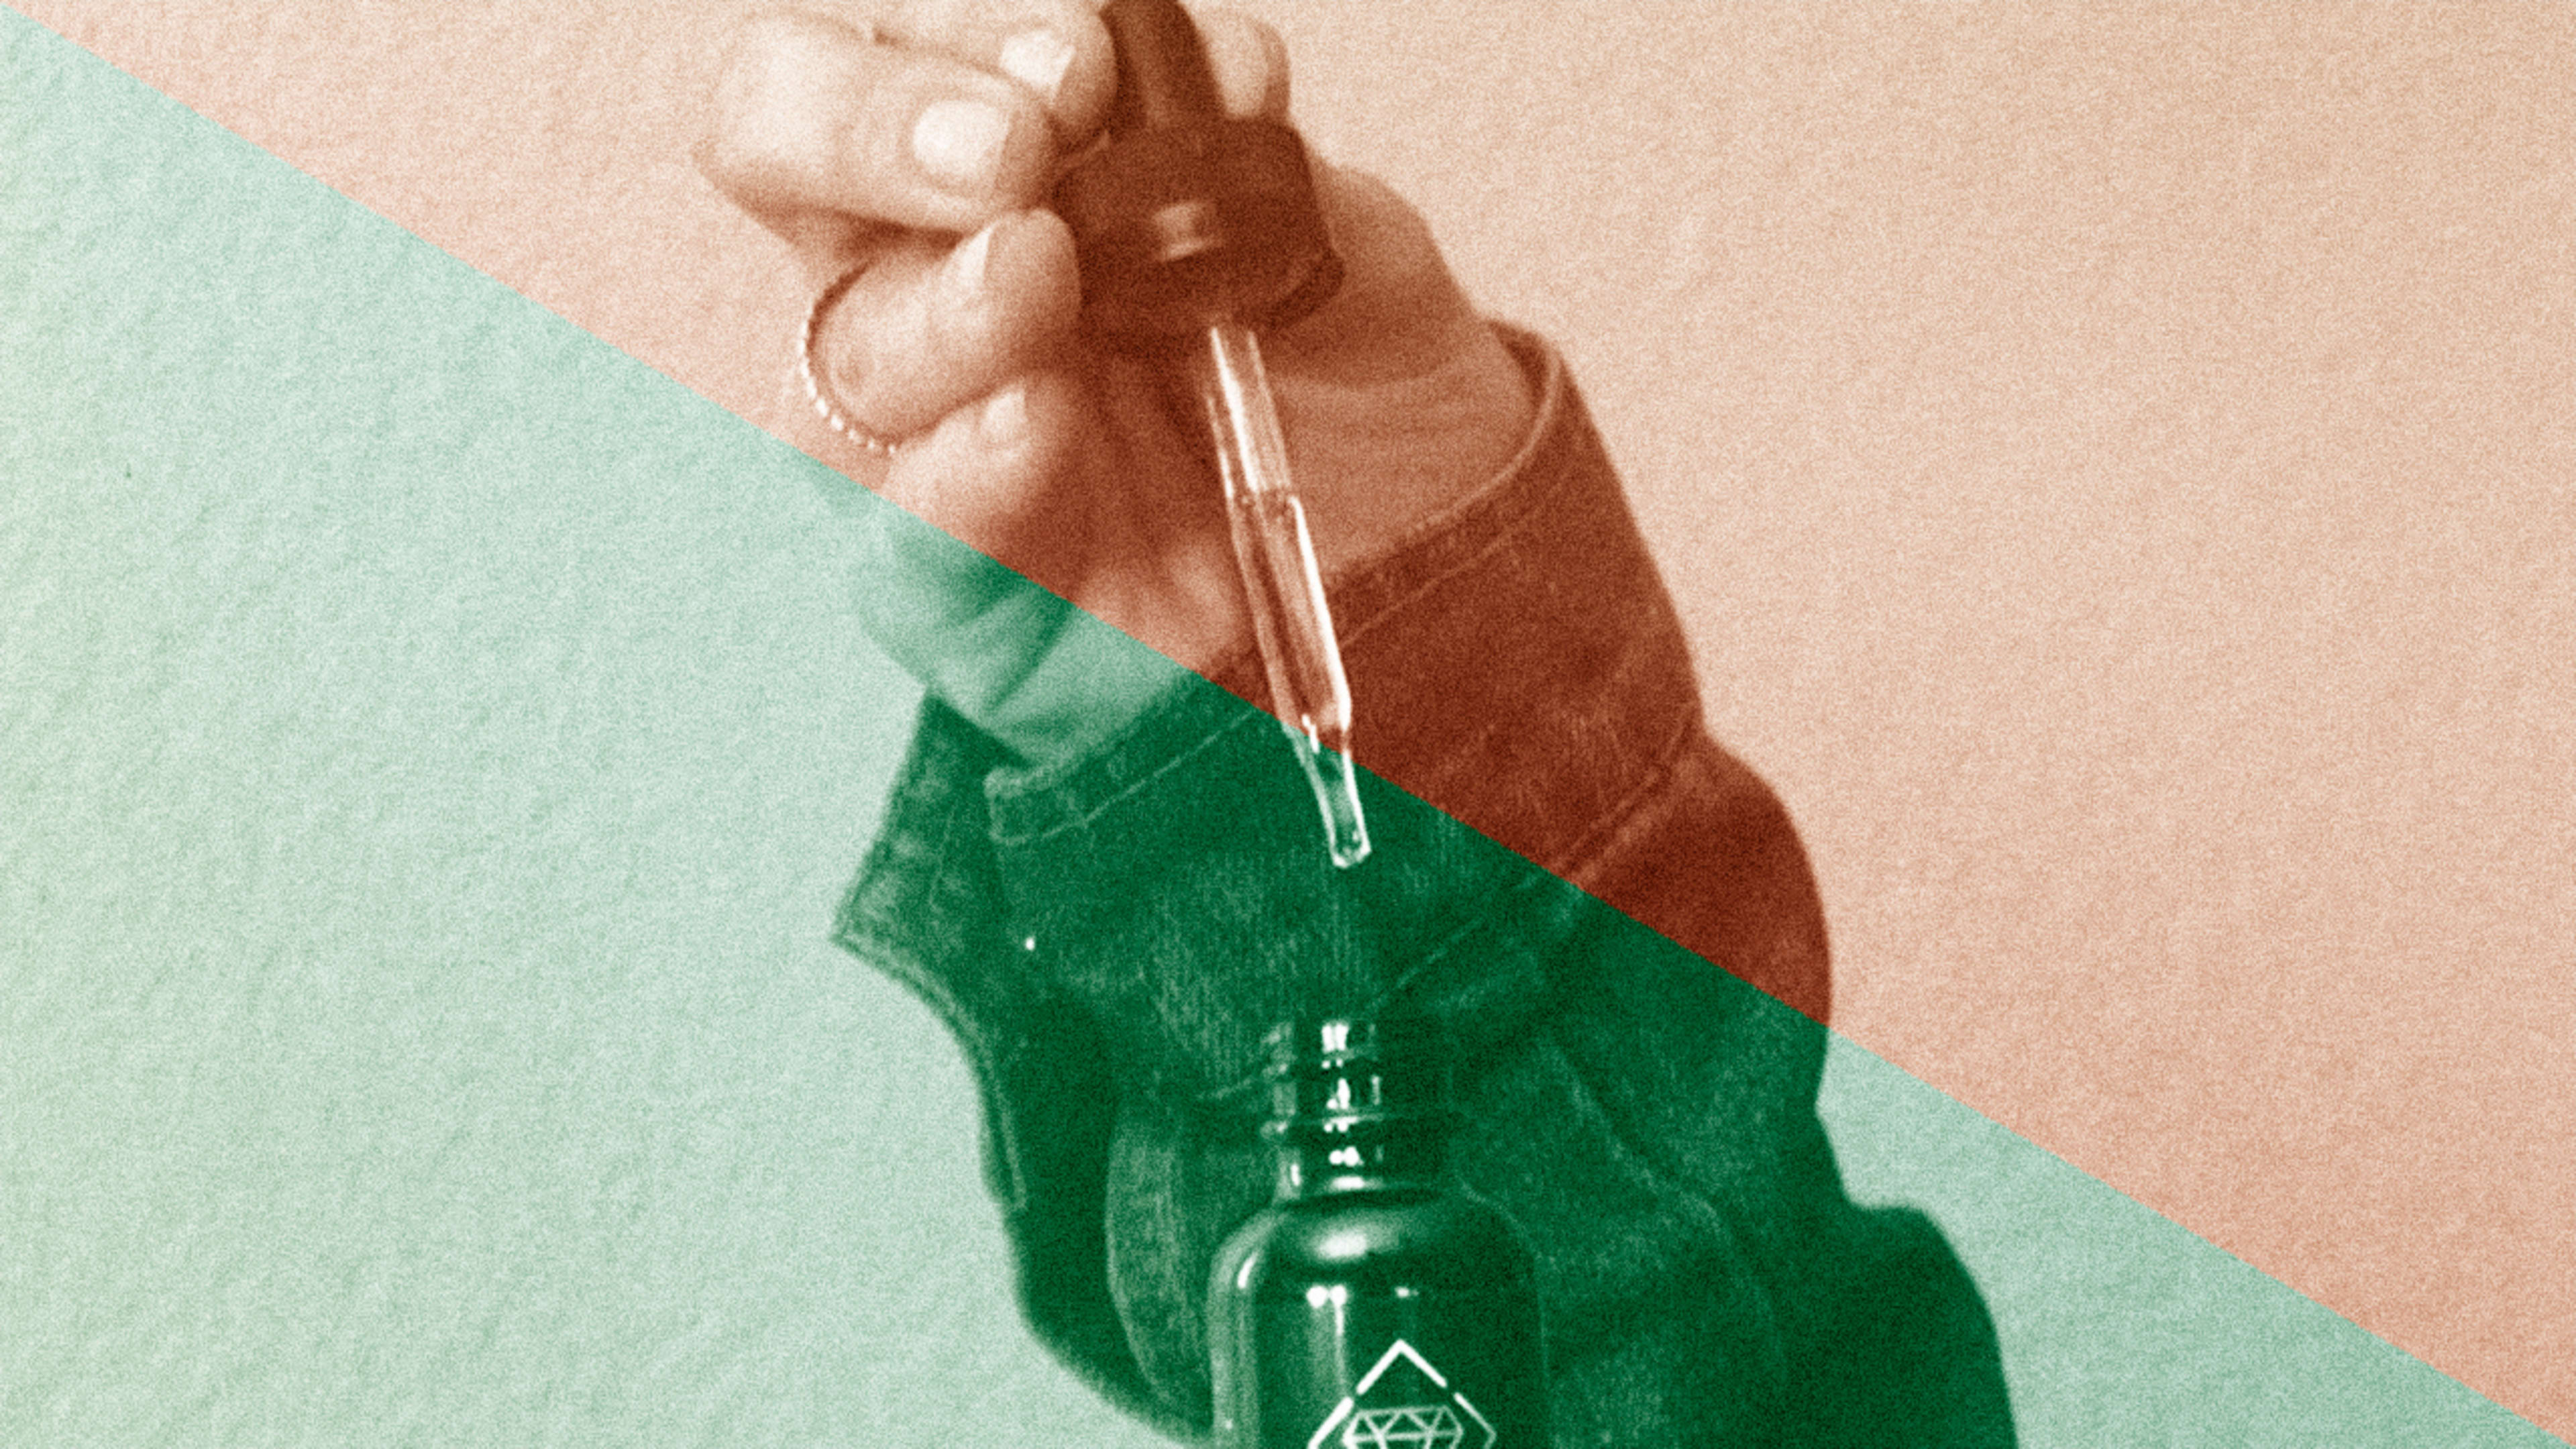 Is CBD safe? We, uh, really don’t know, the FDA warns